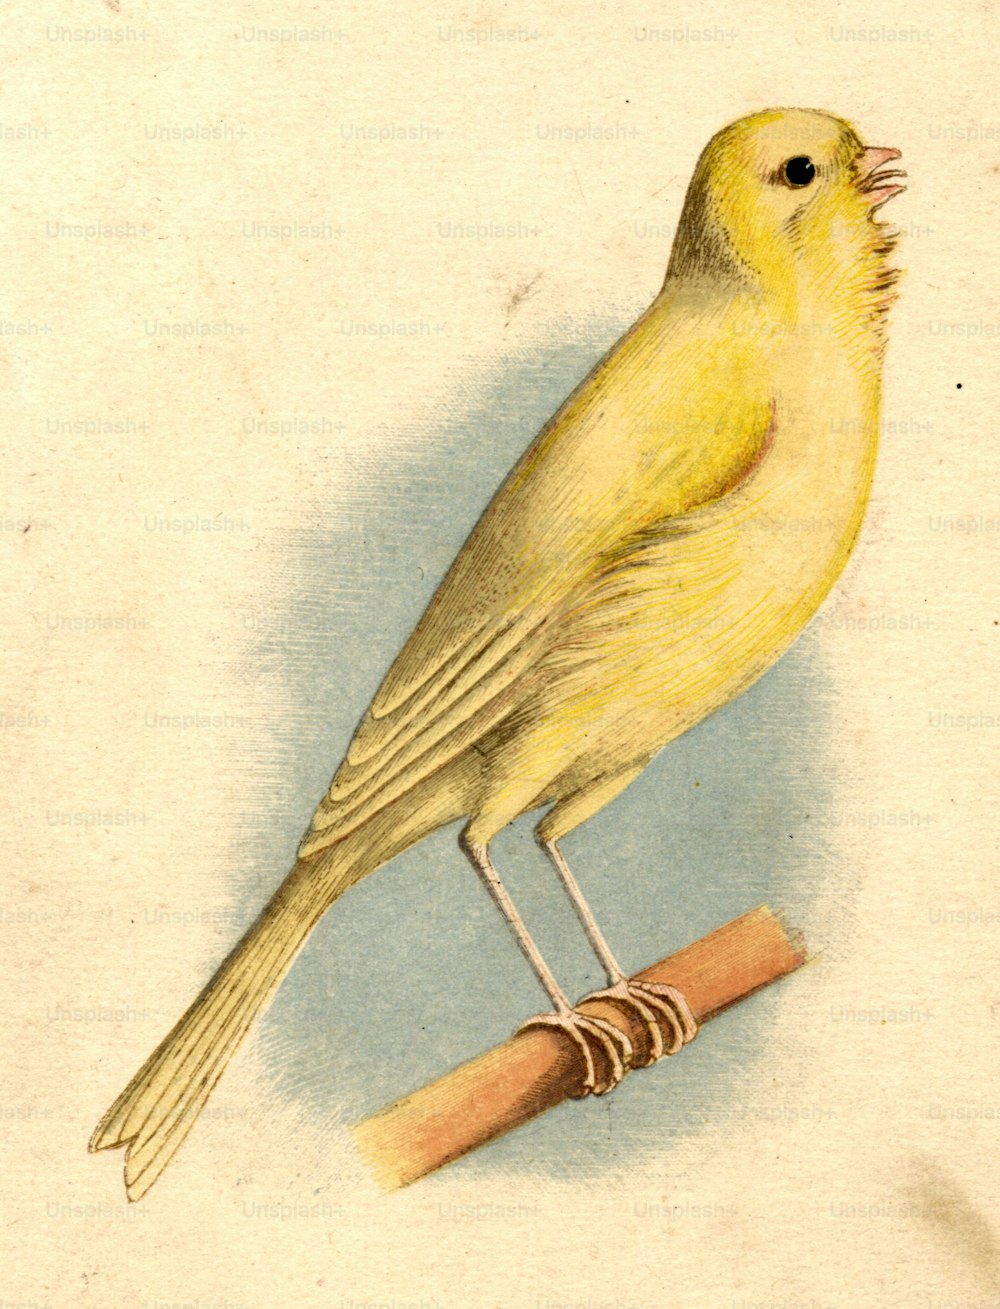 circa 1800:  The common yellow Canary.  (Photo by Hulton Archive/Getty Images)